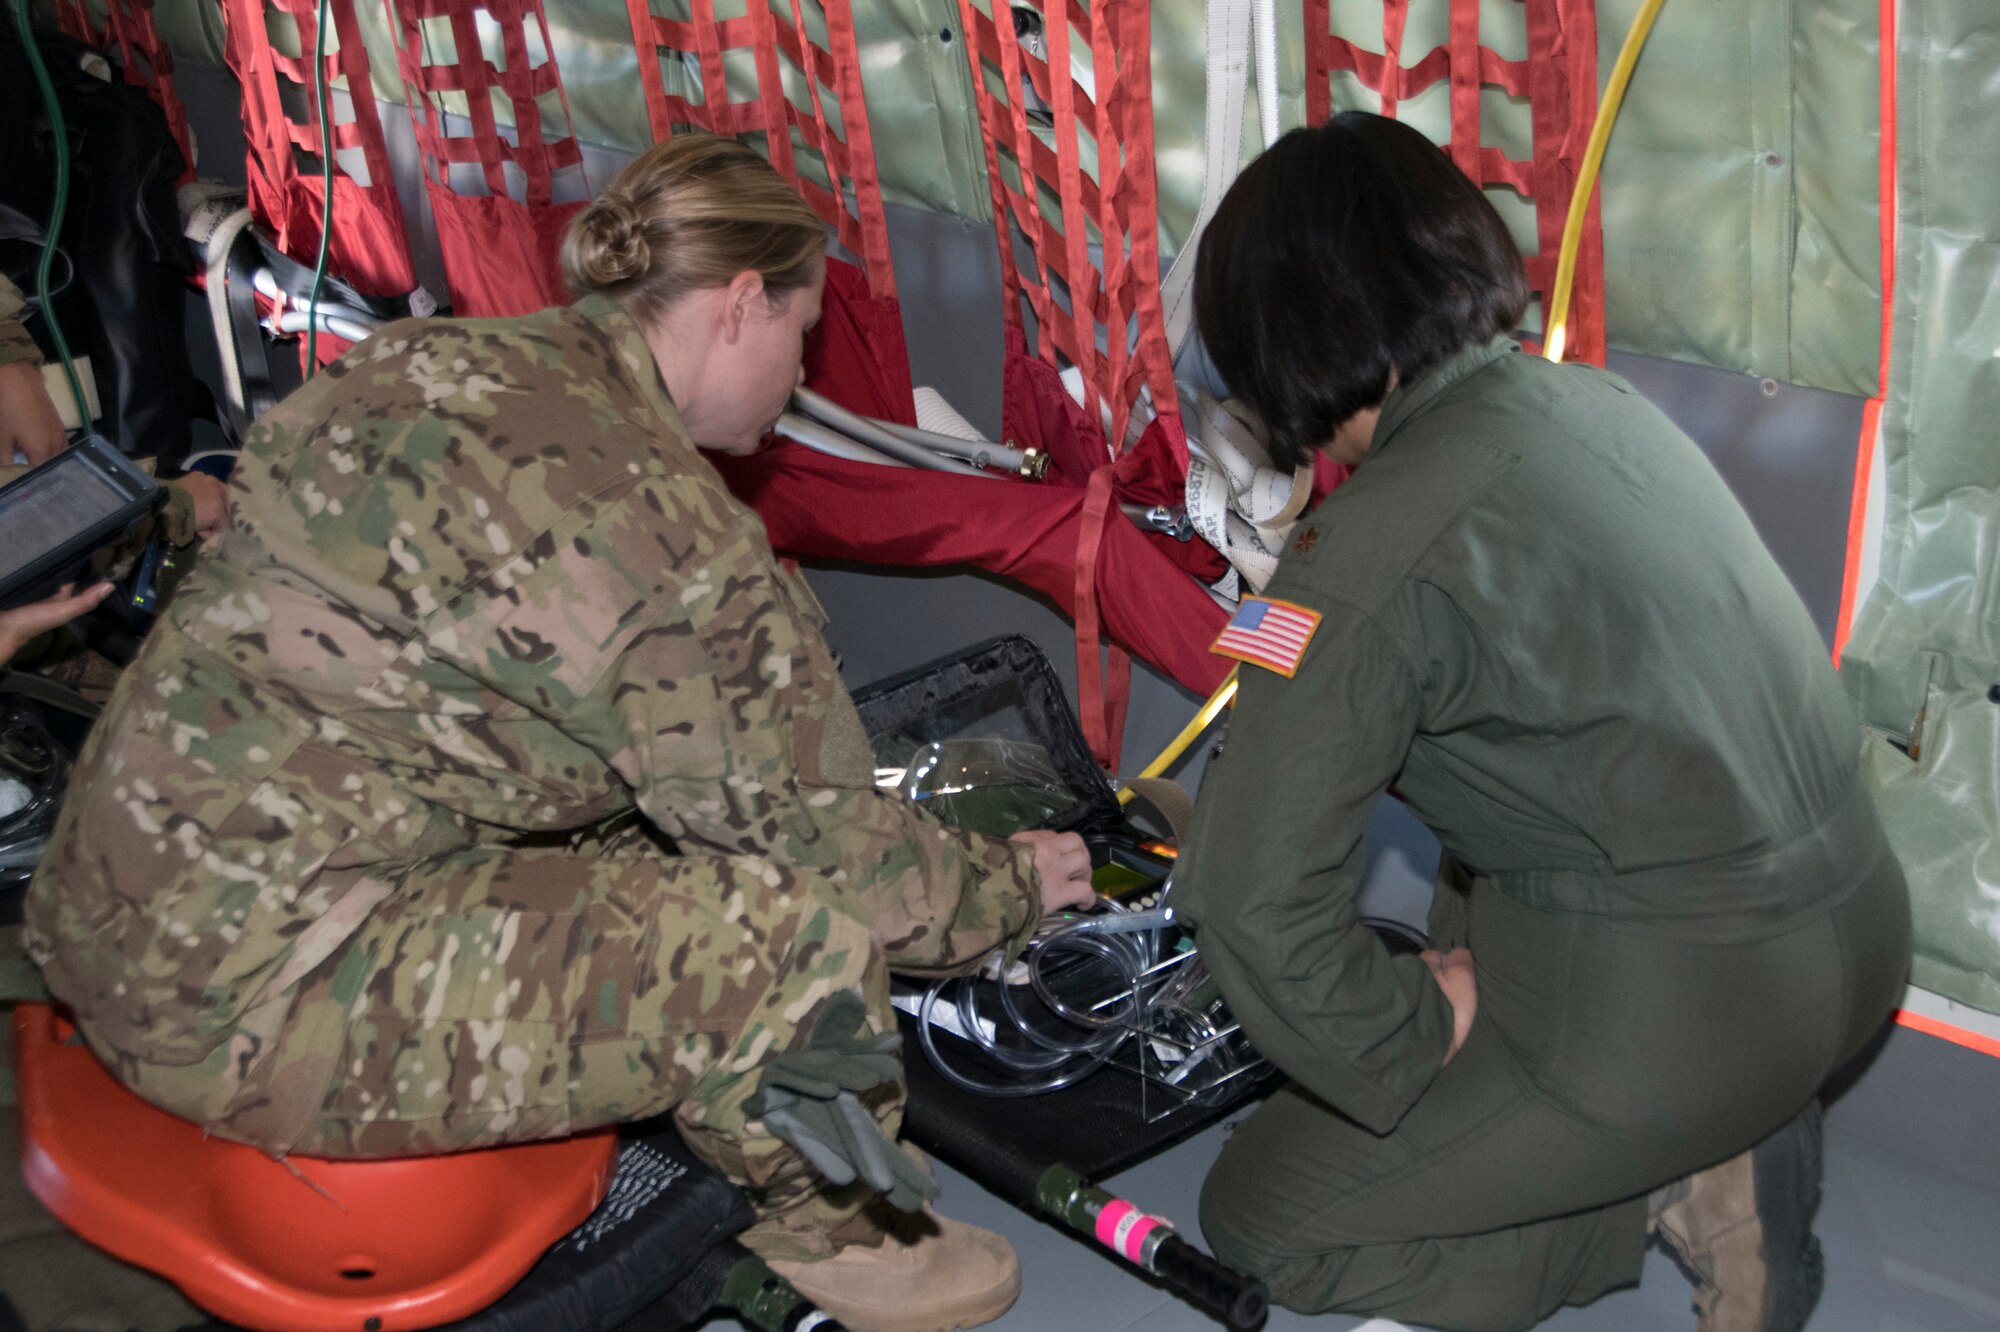 Capt. Lindsey Hammer, 459th Aeromedical Evacuation Squadron flight nurse (left) assists Maj. Christine Cardoza, flight nurse, in a function check of medical equipment prior to taking off for an off station trainer Sept. 20, 2019 at Joint Base Andrews, Md. The team participates in local and off station training missions about twice a month to ensure humanitarian and deployment mission readiness. (U.S. Air Force photo by Staff Sgt. Cierra Presentado/Released)